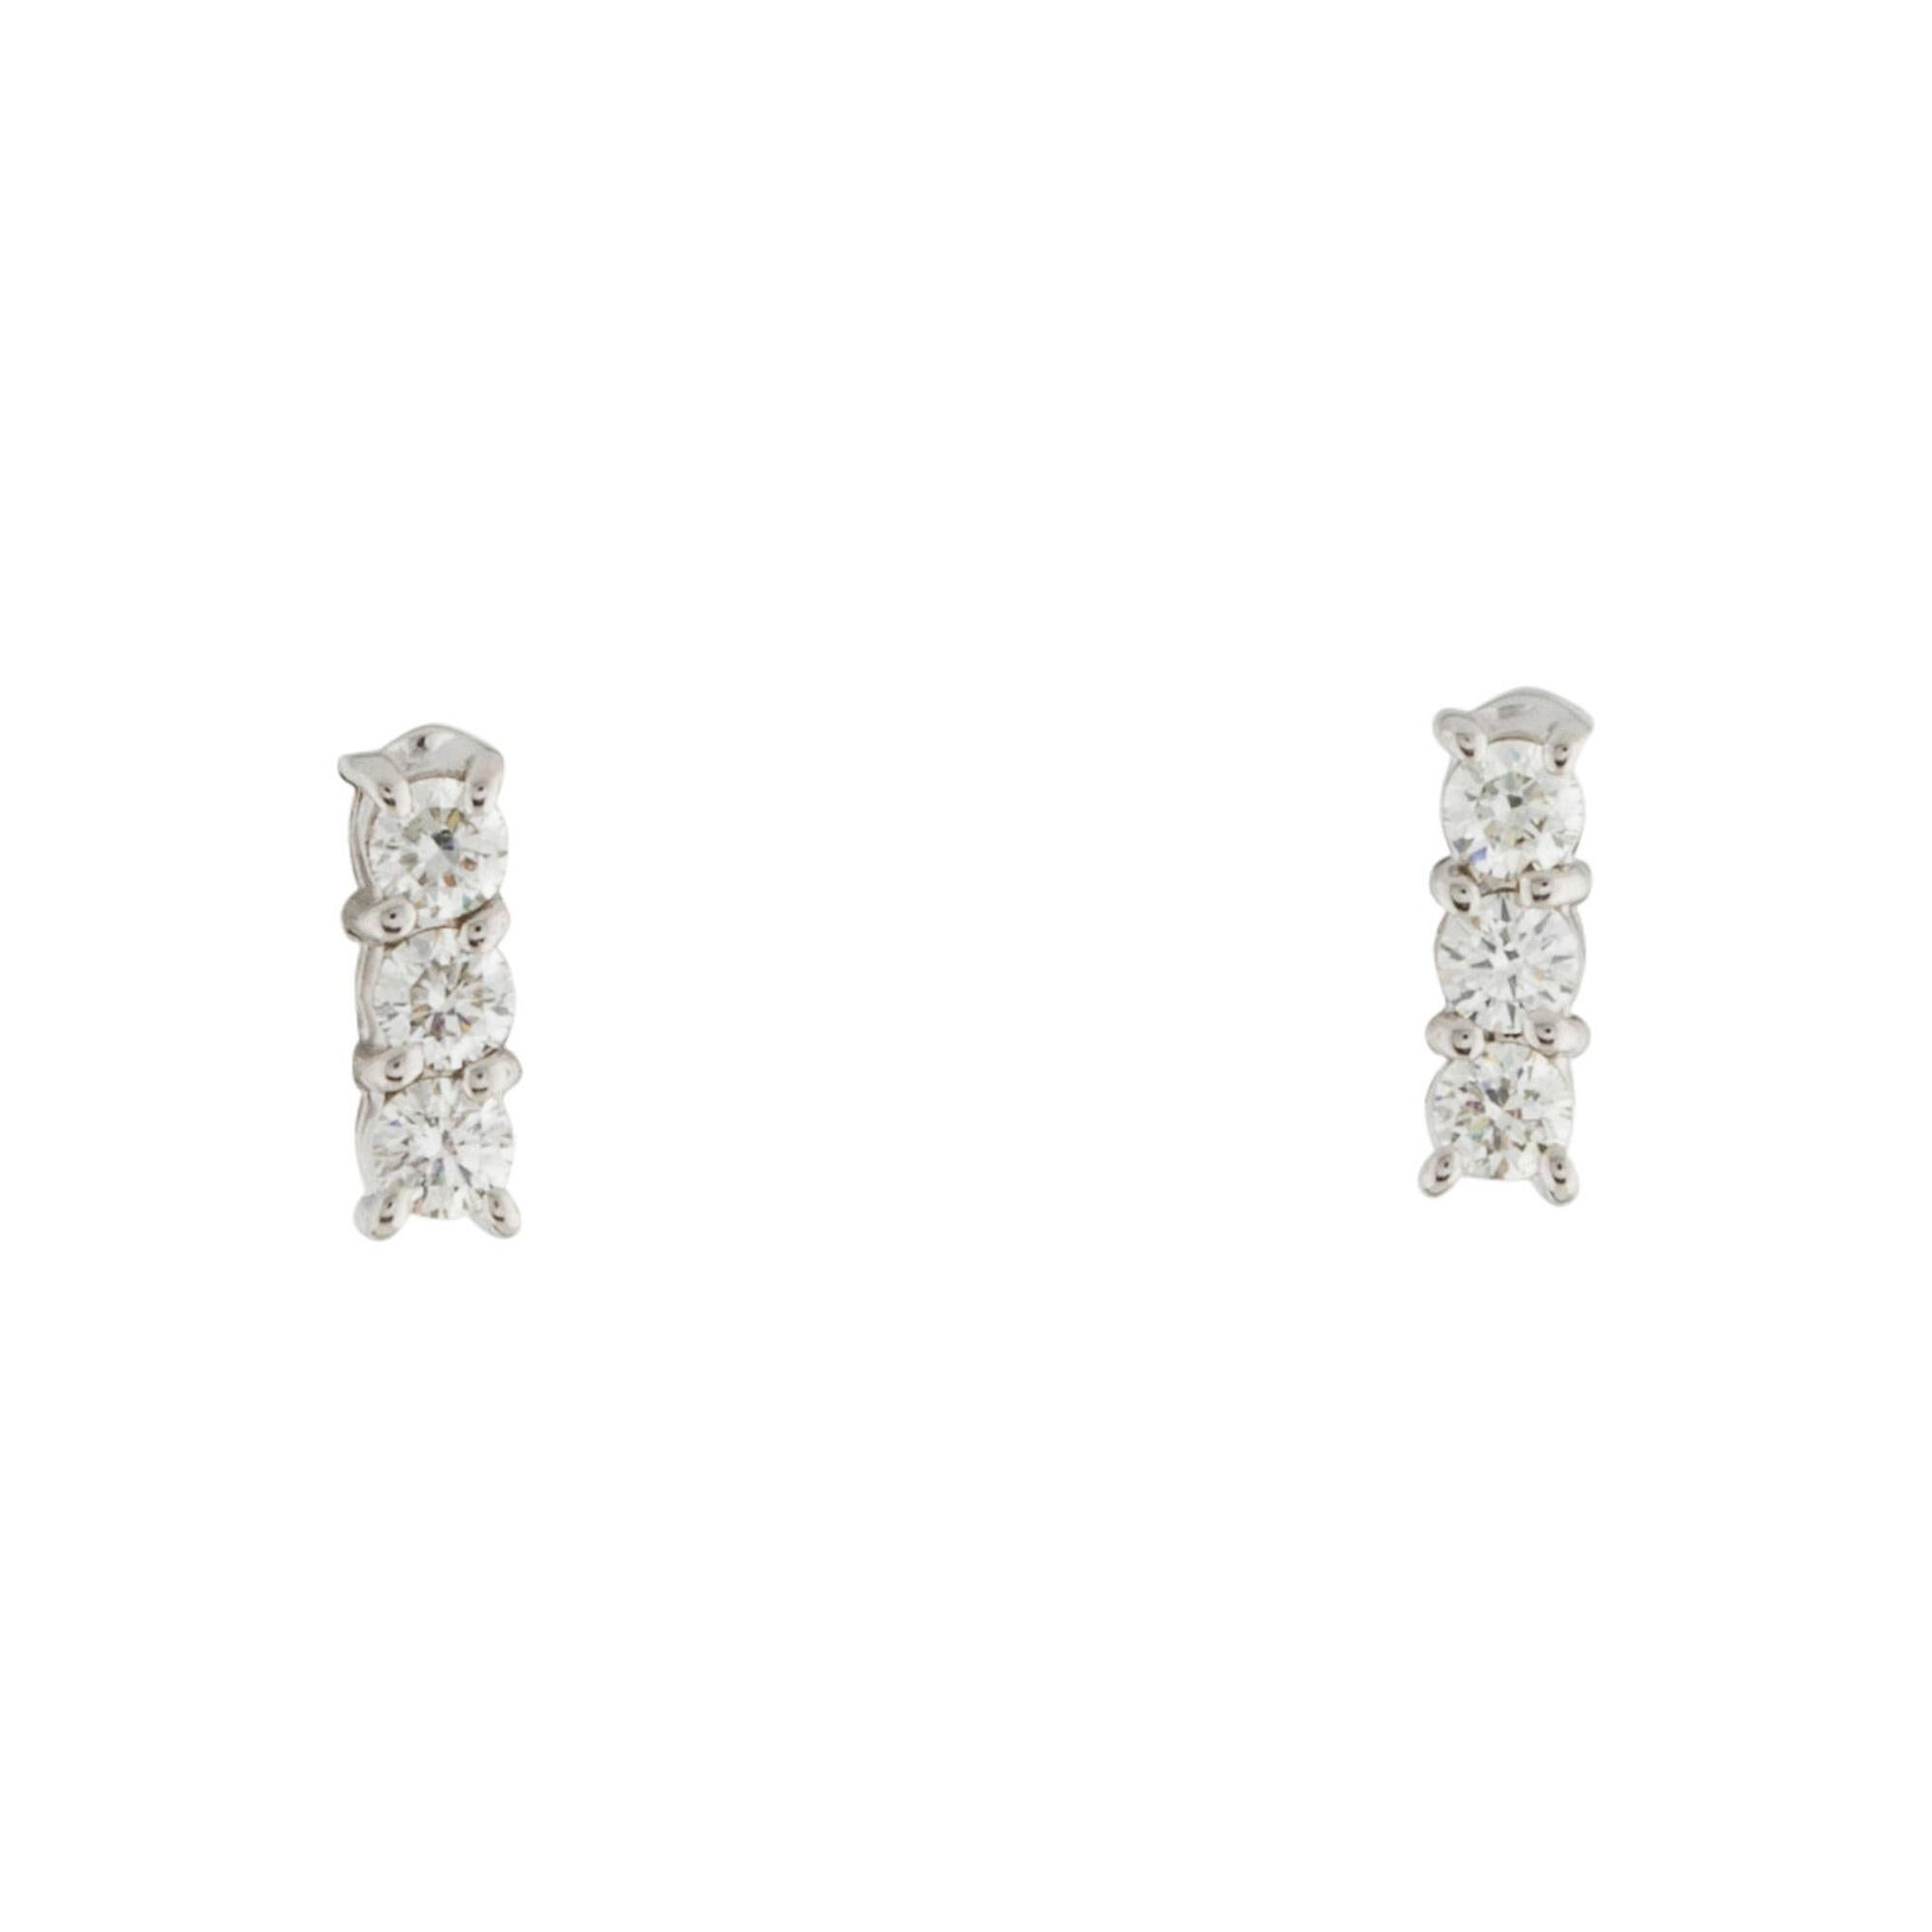 Crafted of 14K Gold these Classic and Pretty 3 Stone Diamond Bar Stud Earrings feature 6 Natural Round Diamonds weighing approximately 0.25ct. Diamond Color & Clarity is GH-SI. Butterfly Push-back closure. Available in White, Yellow & Rose